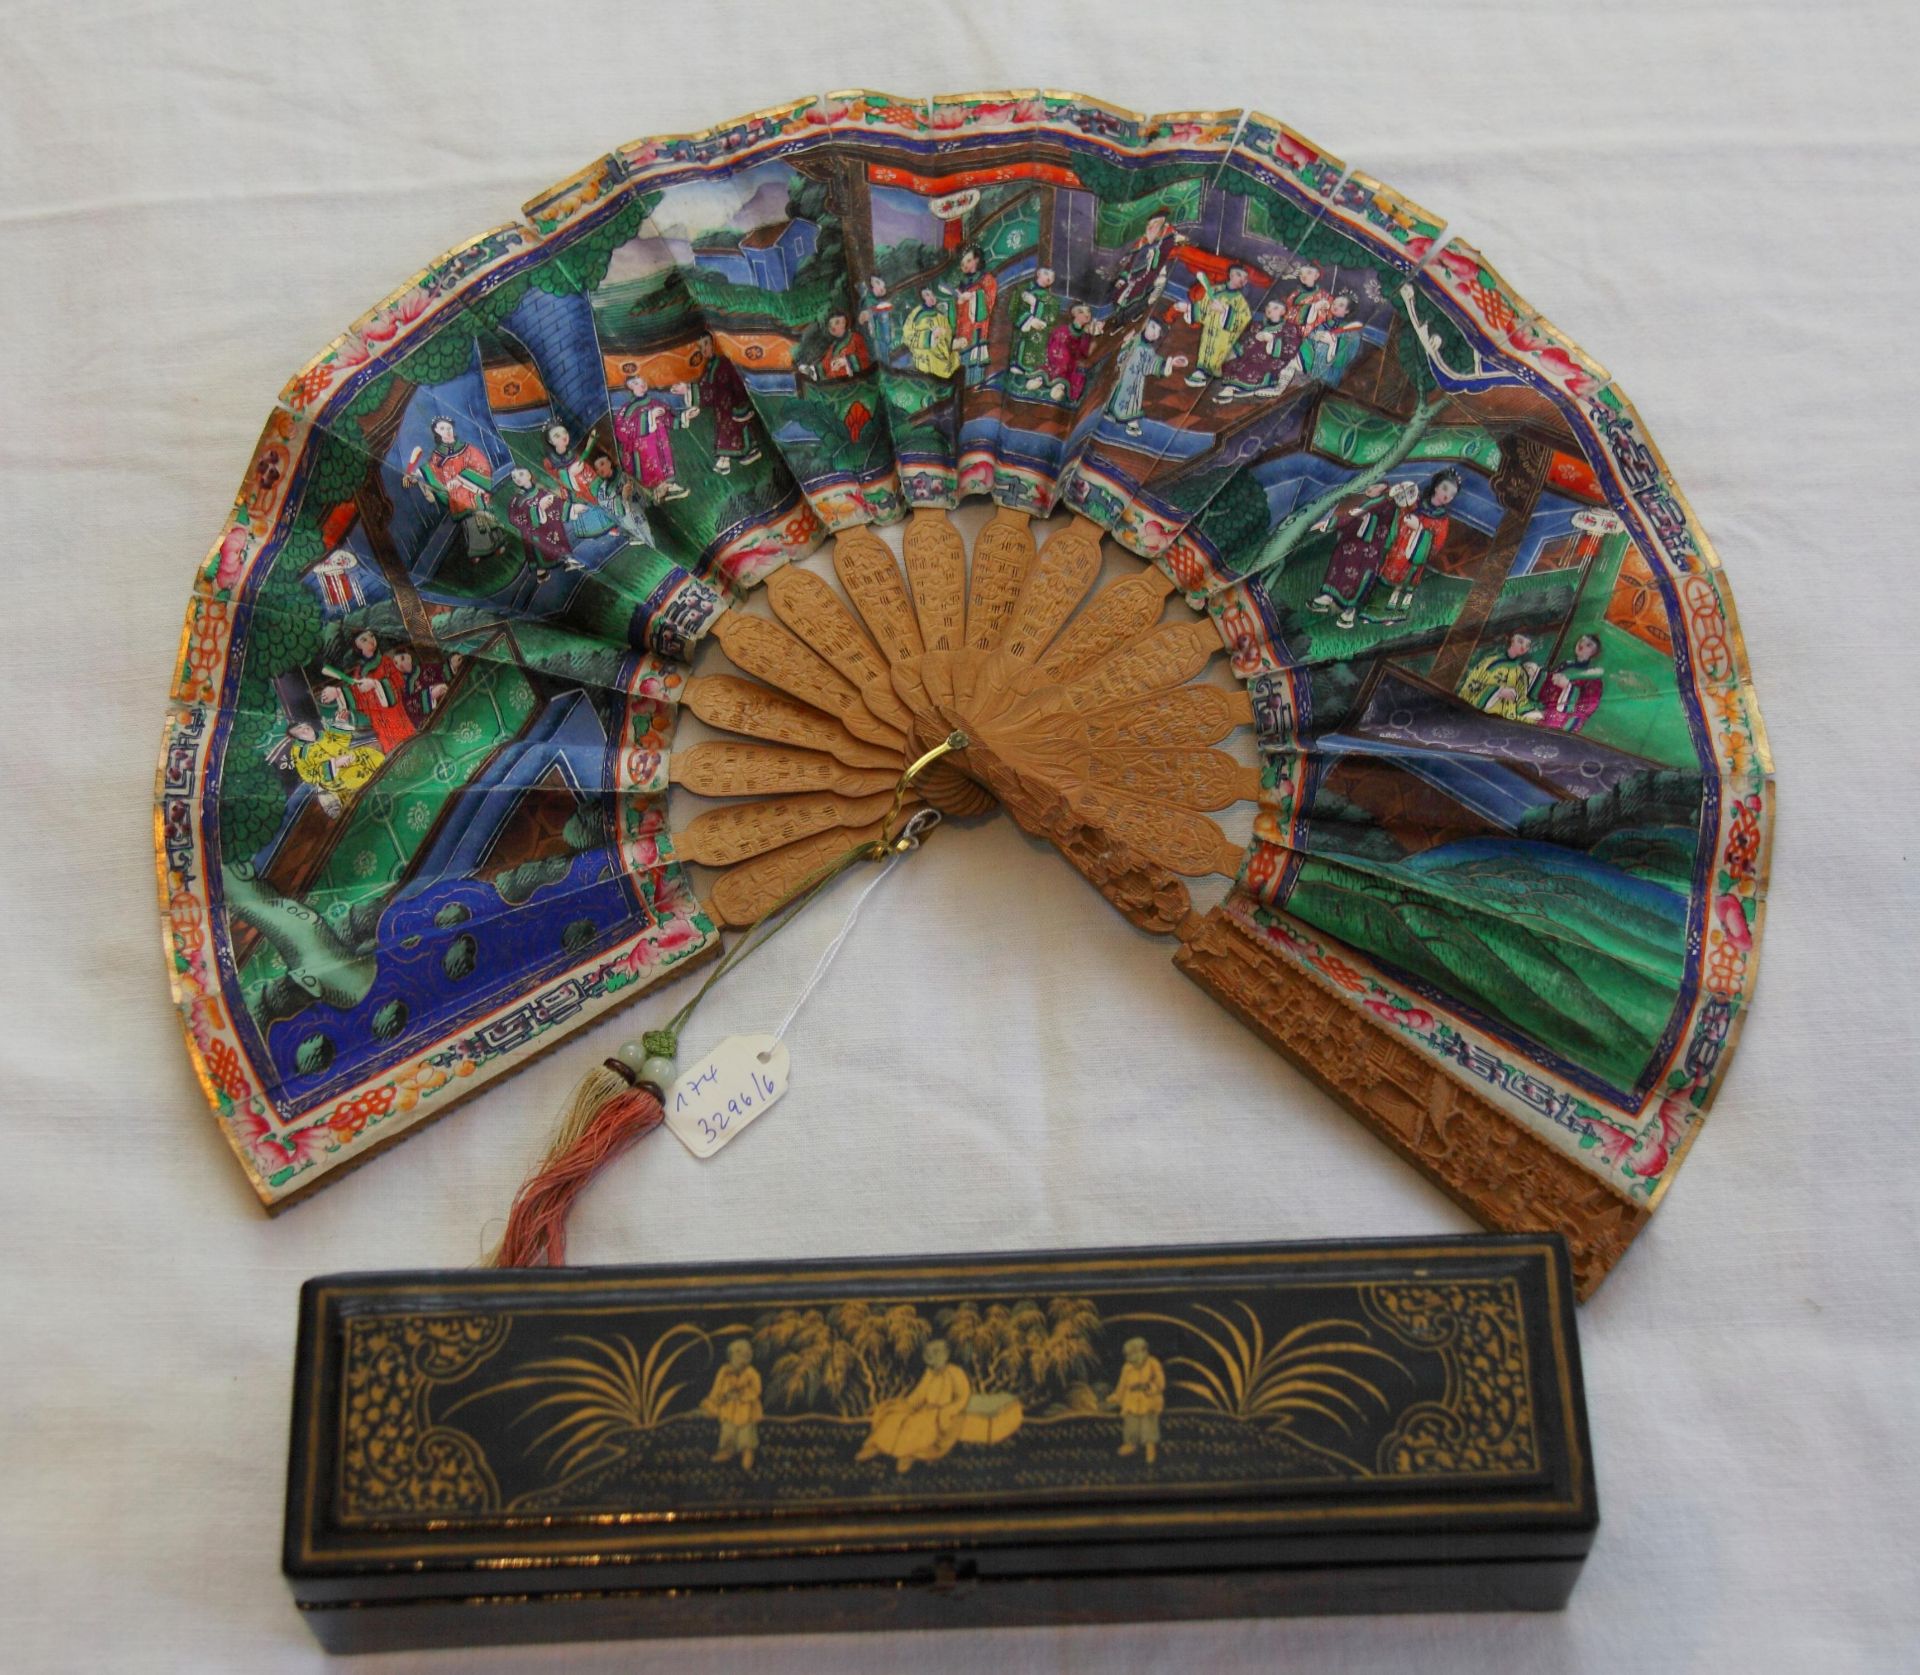 TWO FANS WITH GENRE SCENES, LANDSCAPES AND FLOWERS. Origin: China. Dynasty: Qing dynasty. Date: - Bild 3 aus 11